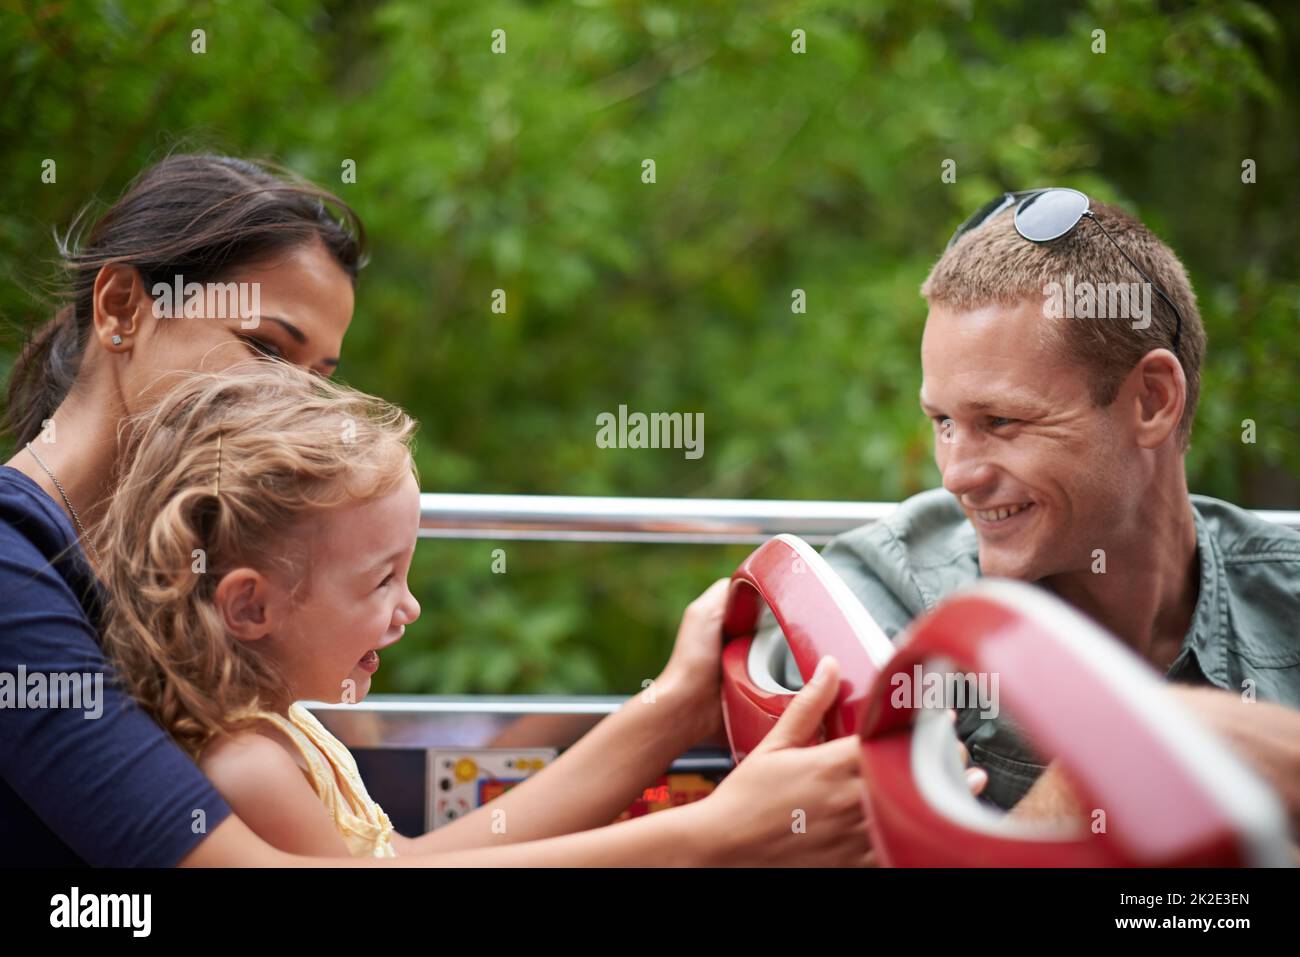 Are you ready to see Disneyland. Shot of a happy young family sitting on a bus. Stock Photo